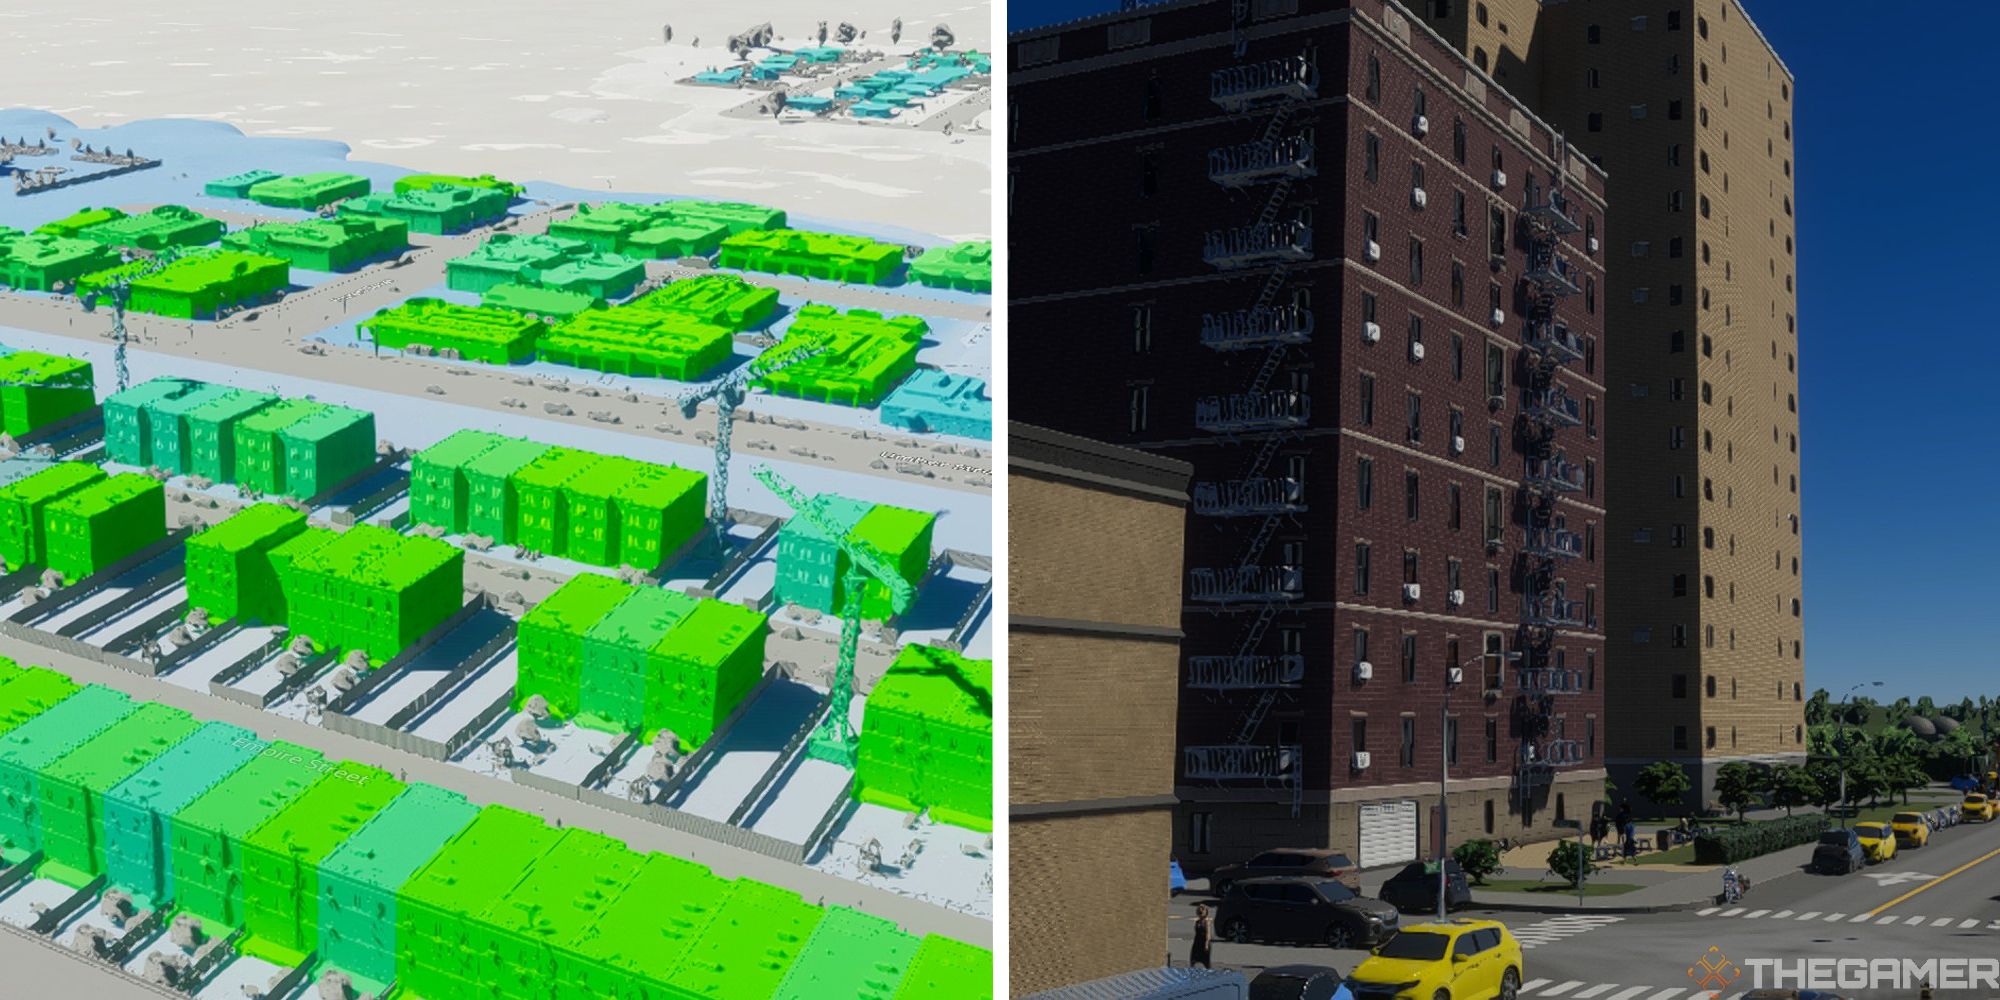 Cities Skylines 2 may have just fixed our worst housing problem